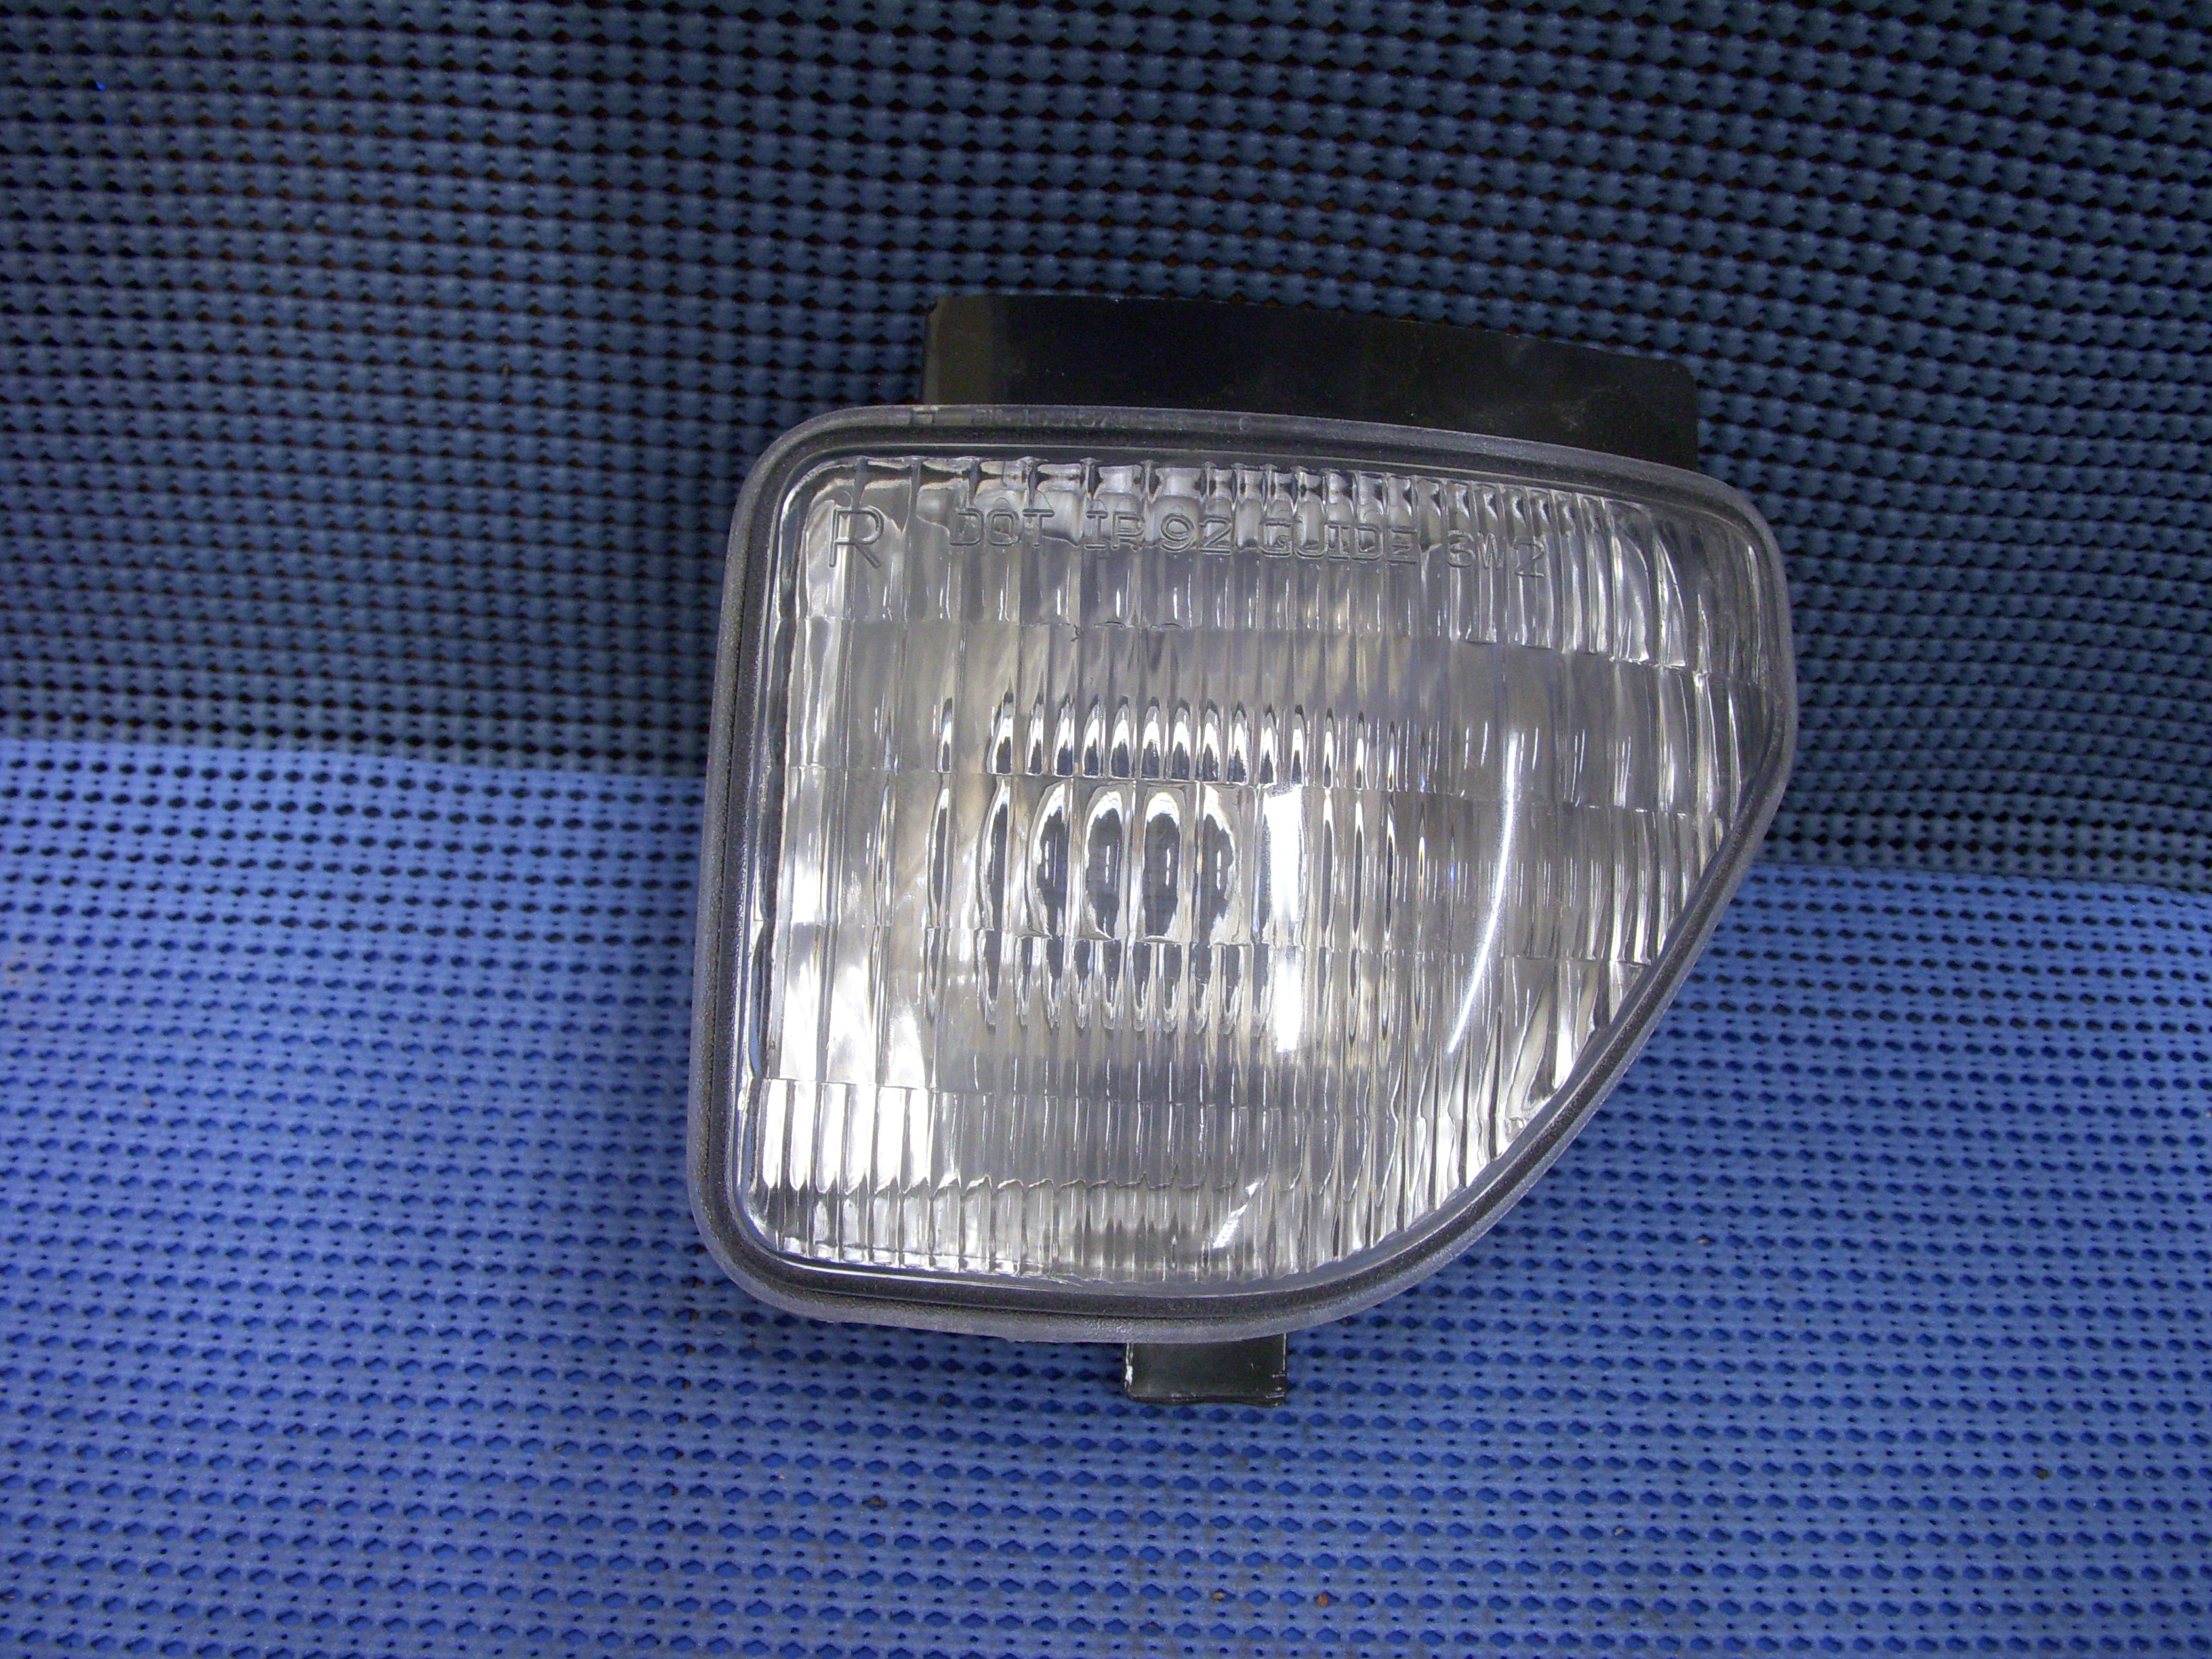 1993 - 1997 Right Hand Park and Signal Lamp NOS # 5977220